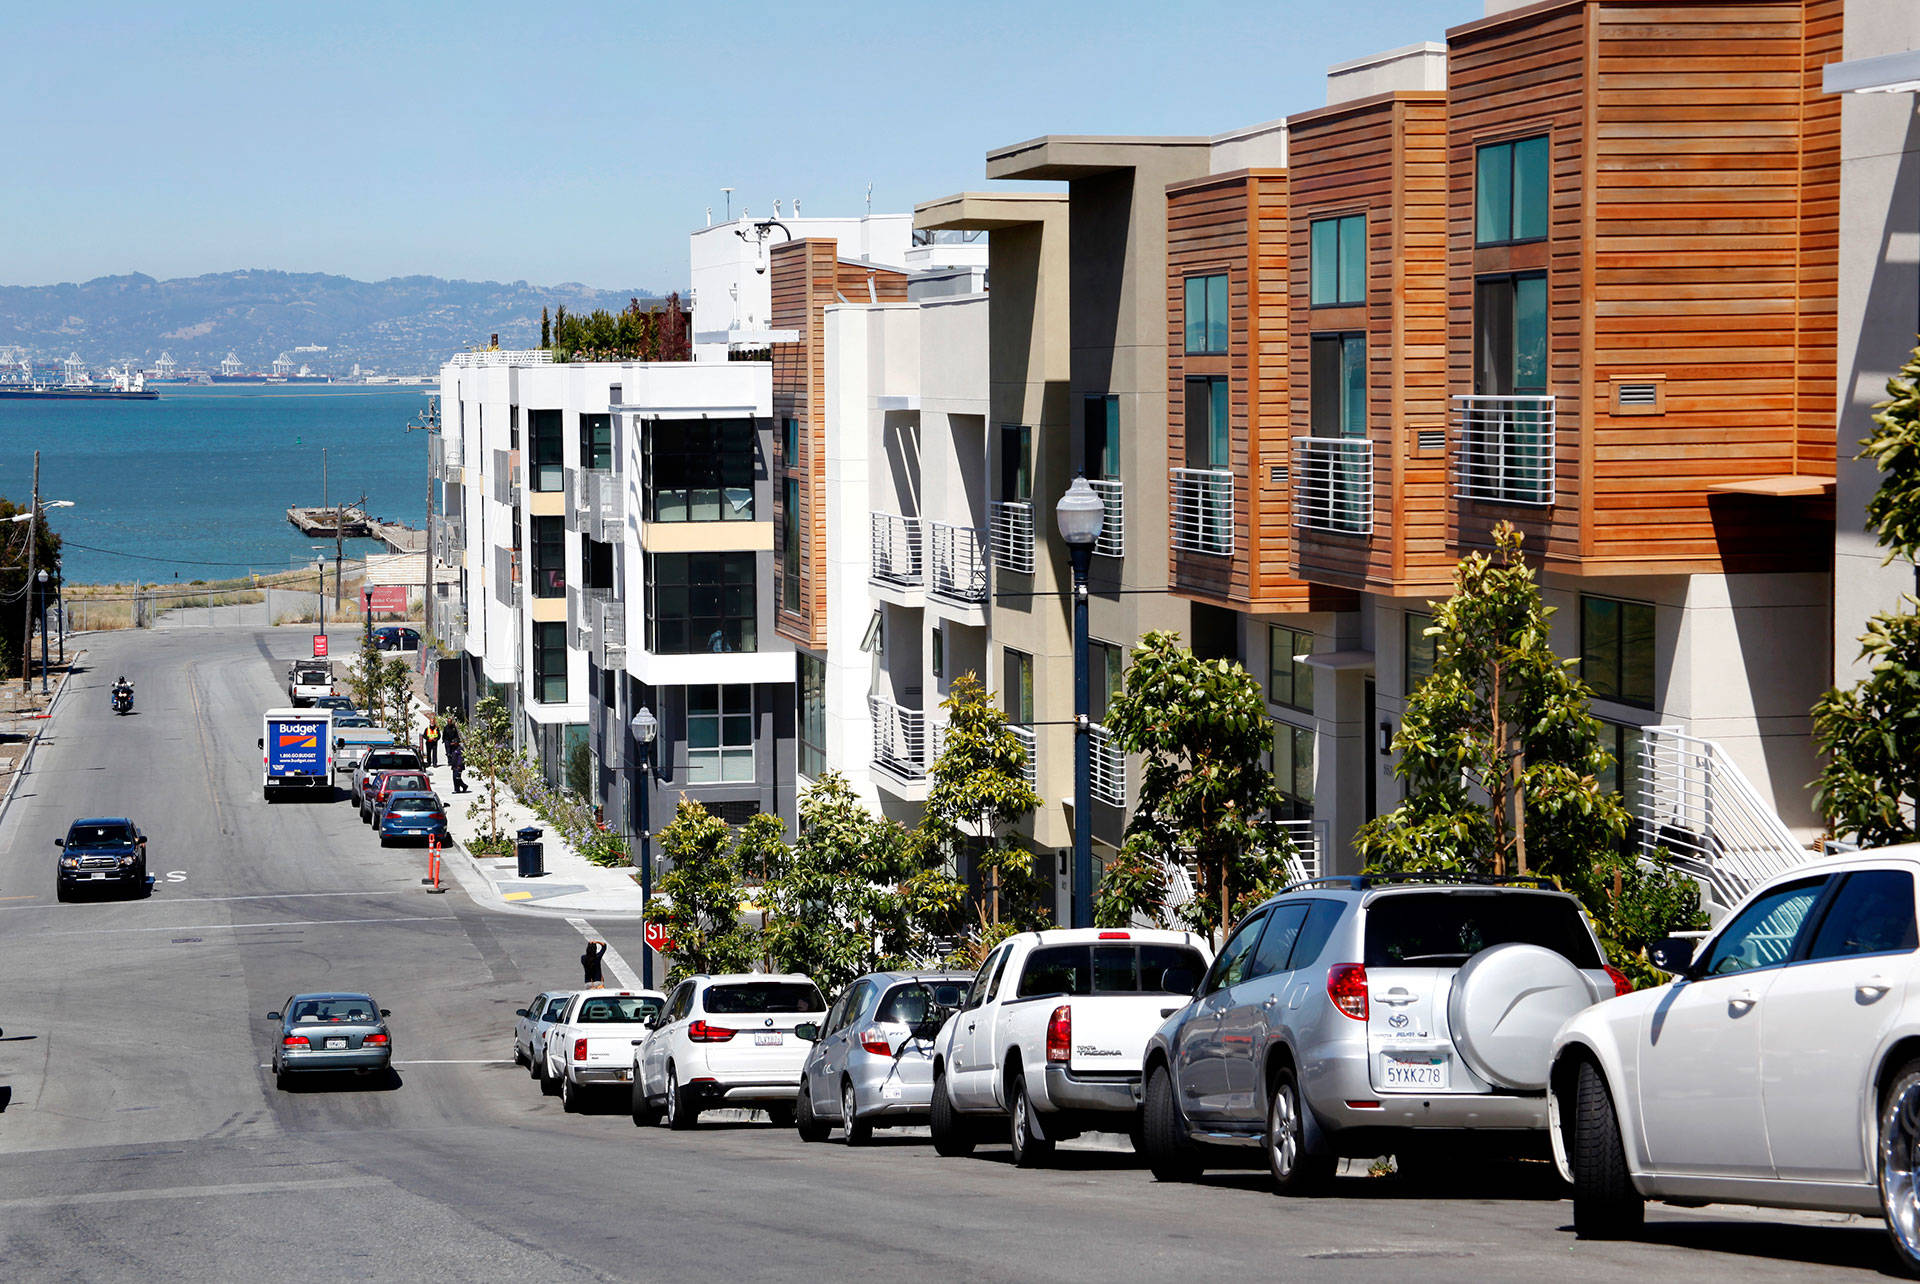 Several finished apartment buildings in Lennar's San Francisco Shipyard development look out over the bay in Hunters Point. Brittany Hosea-Small/KQED